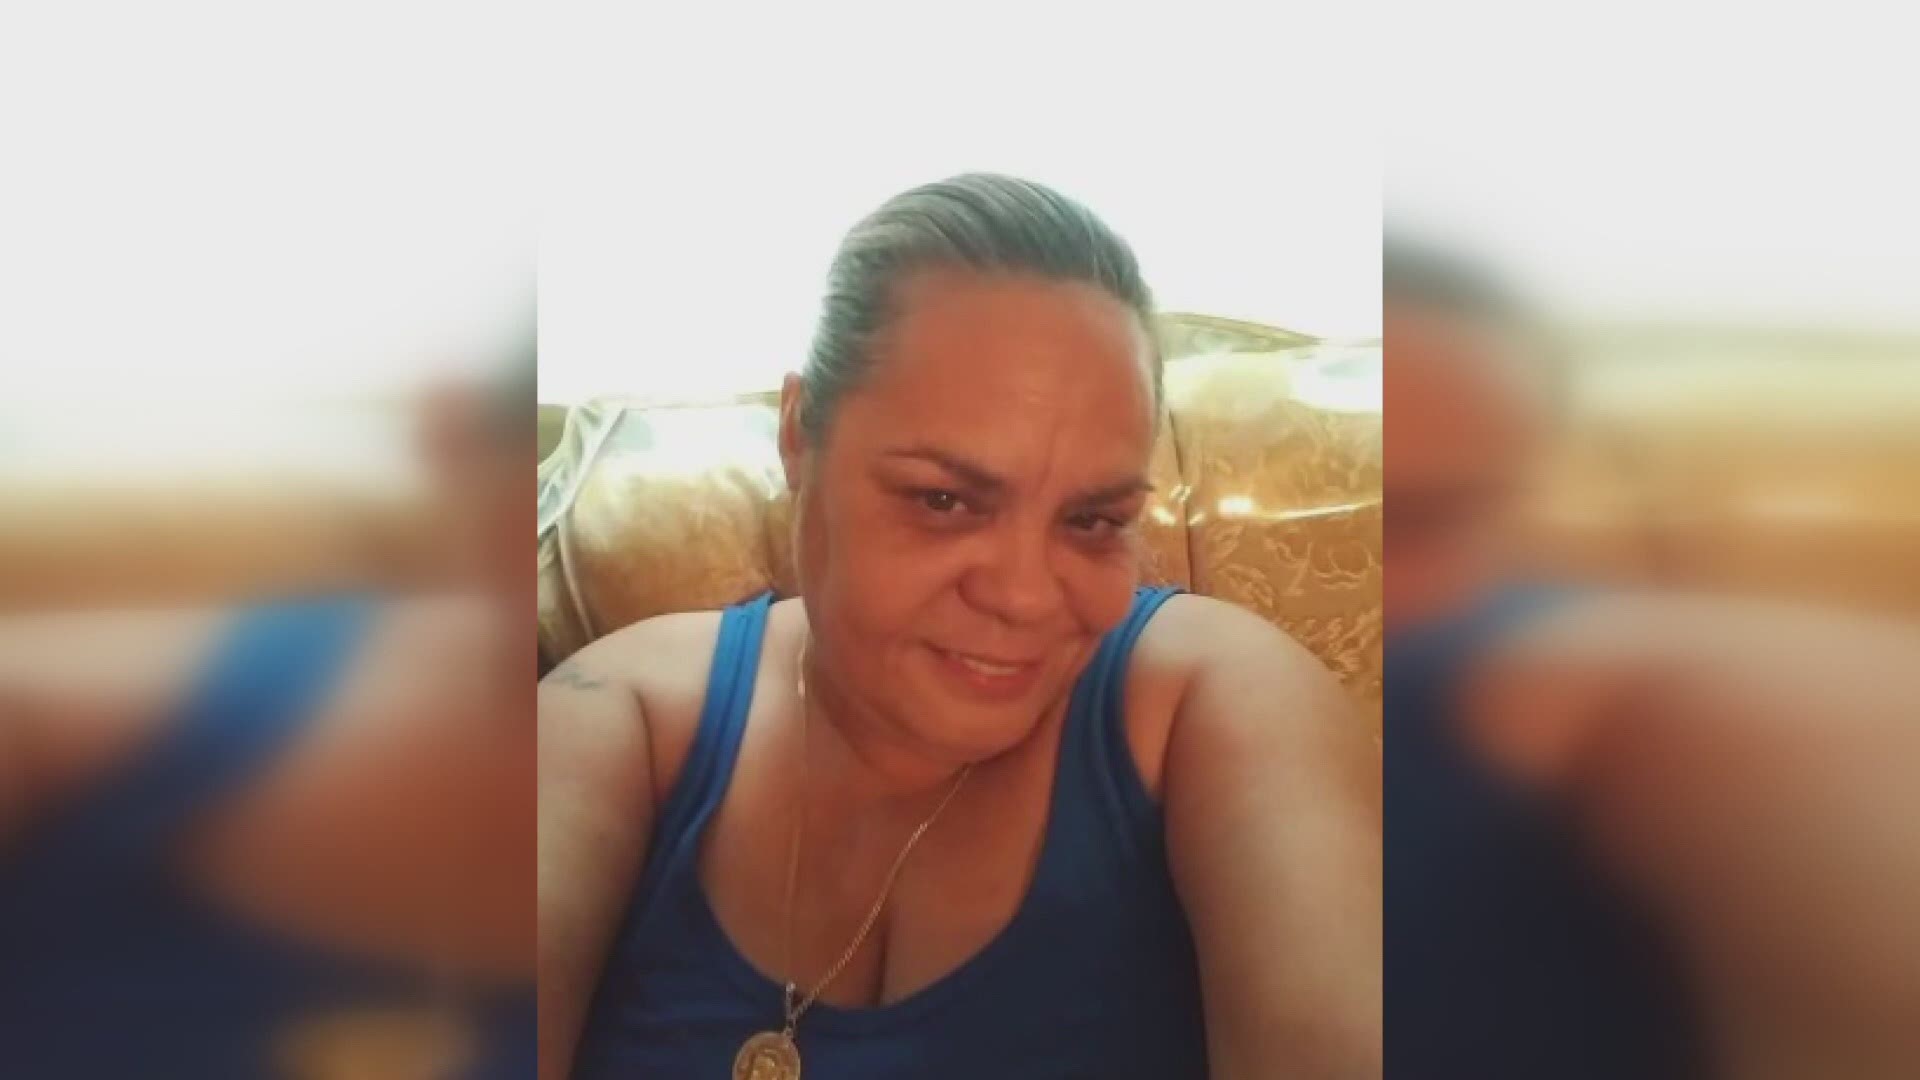 The family of the grandmother is asking anyone who may know something to call the police.